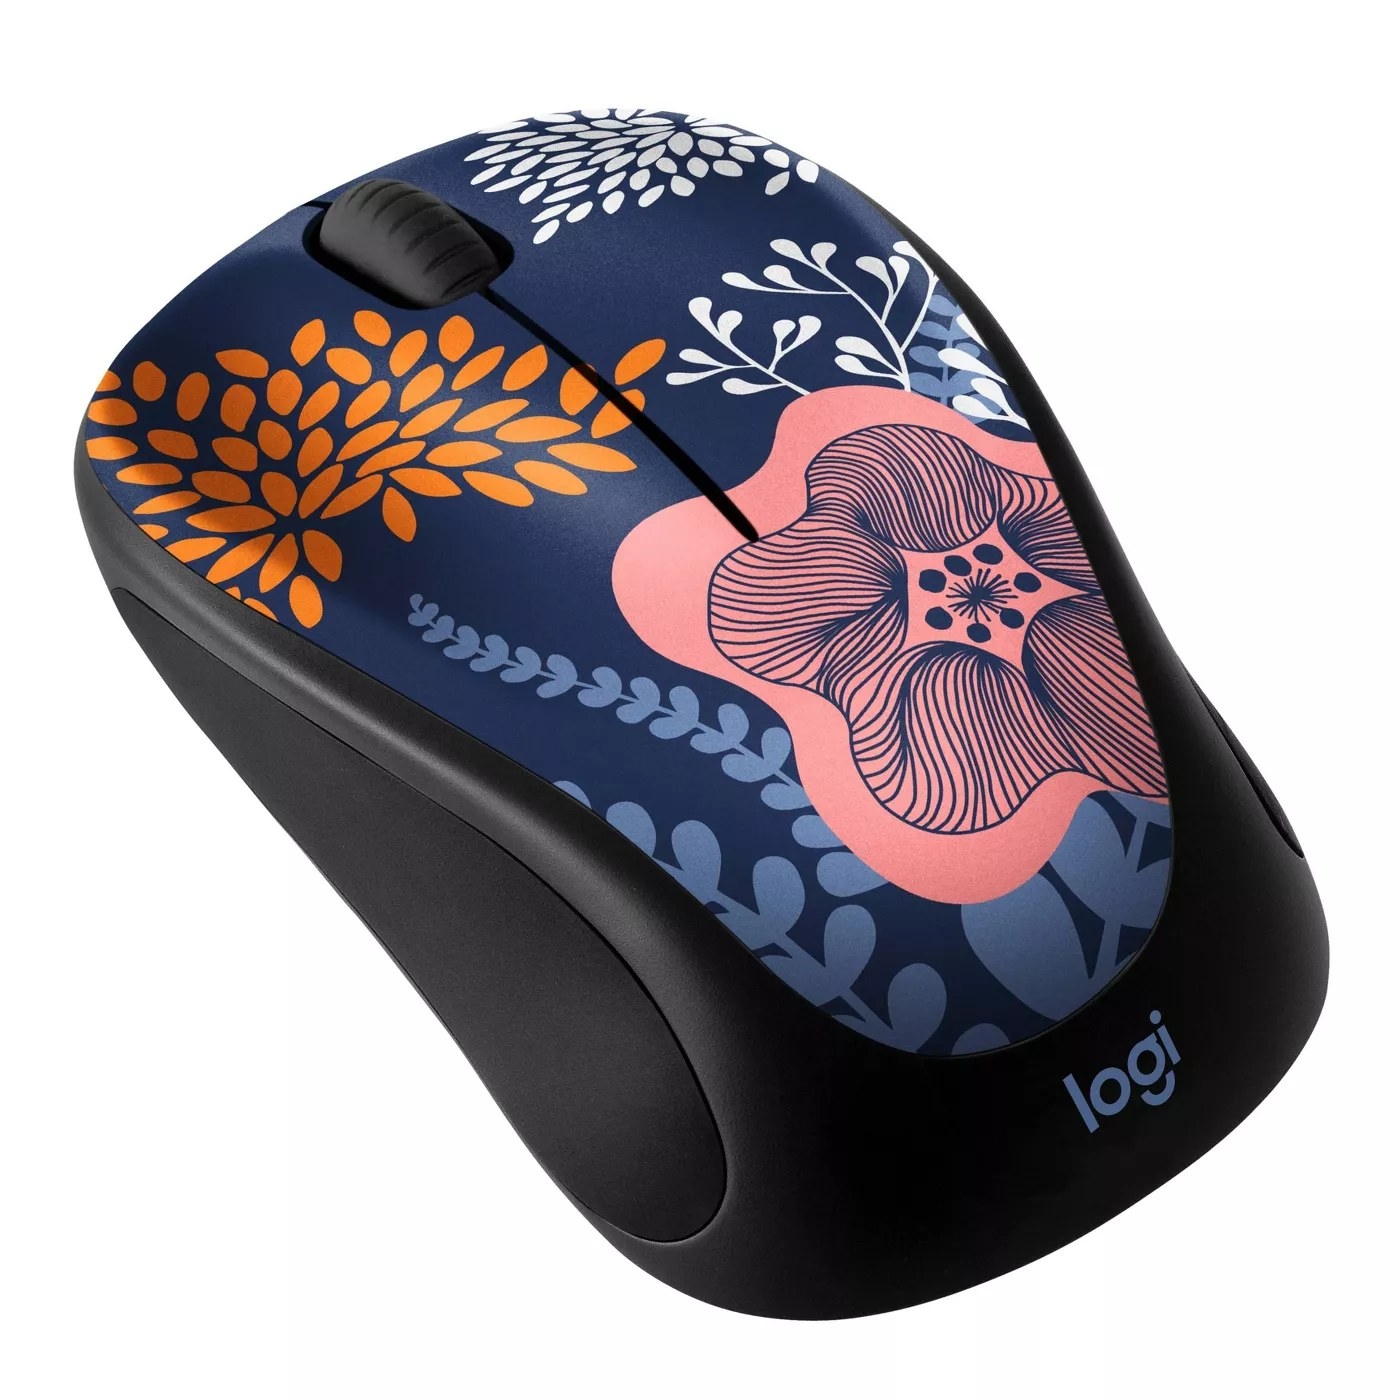 The blue and black Logitech mouse with a flower pattern